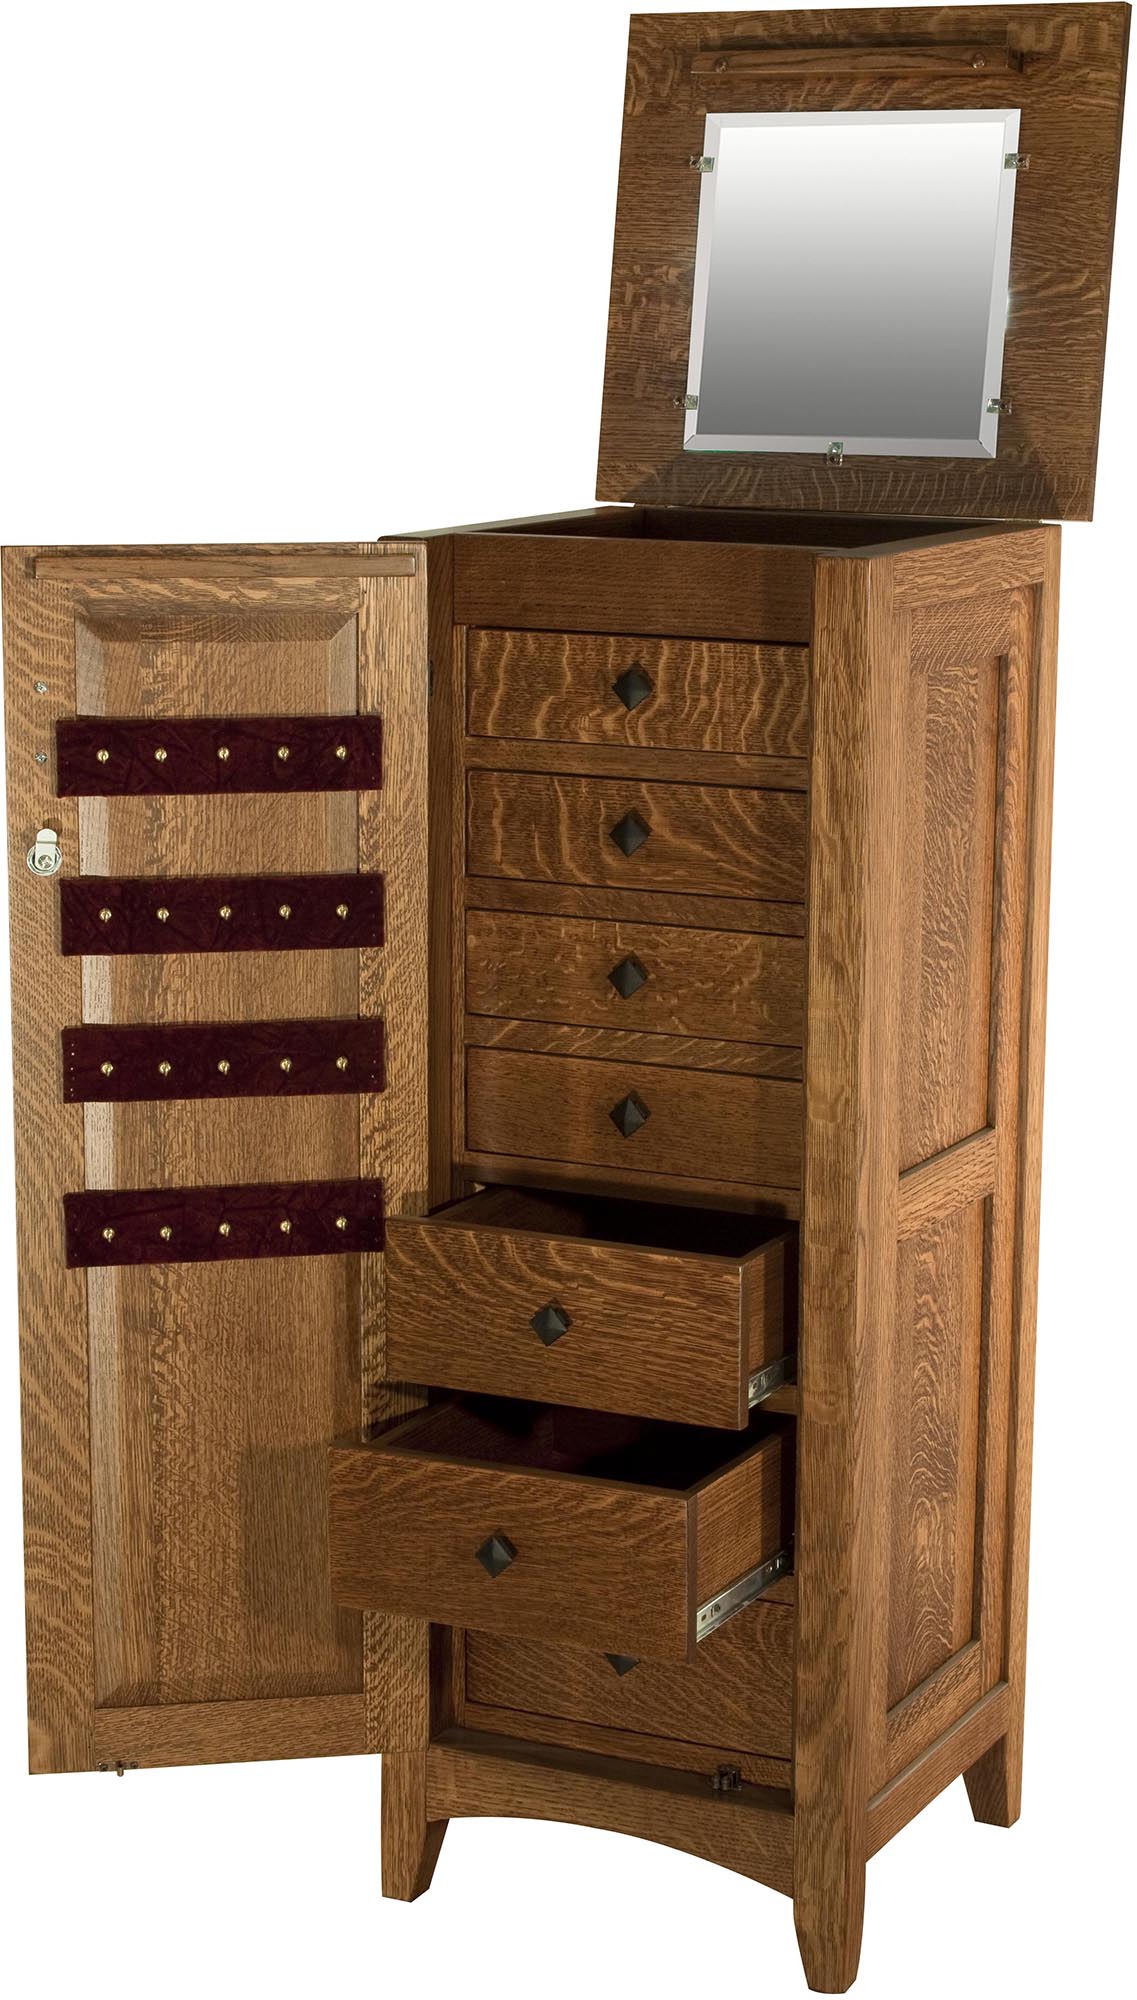 Flush Mission Jewelry Armoire with Lockable Door - Weaver Furniture